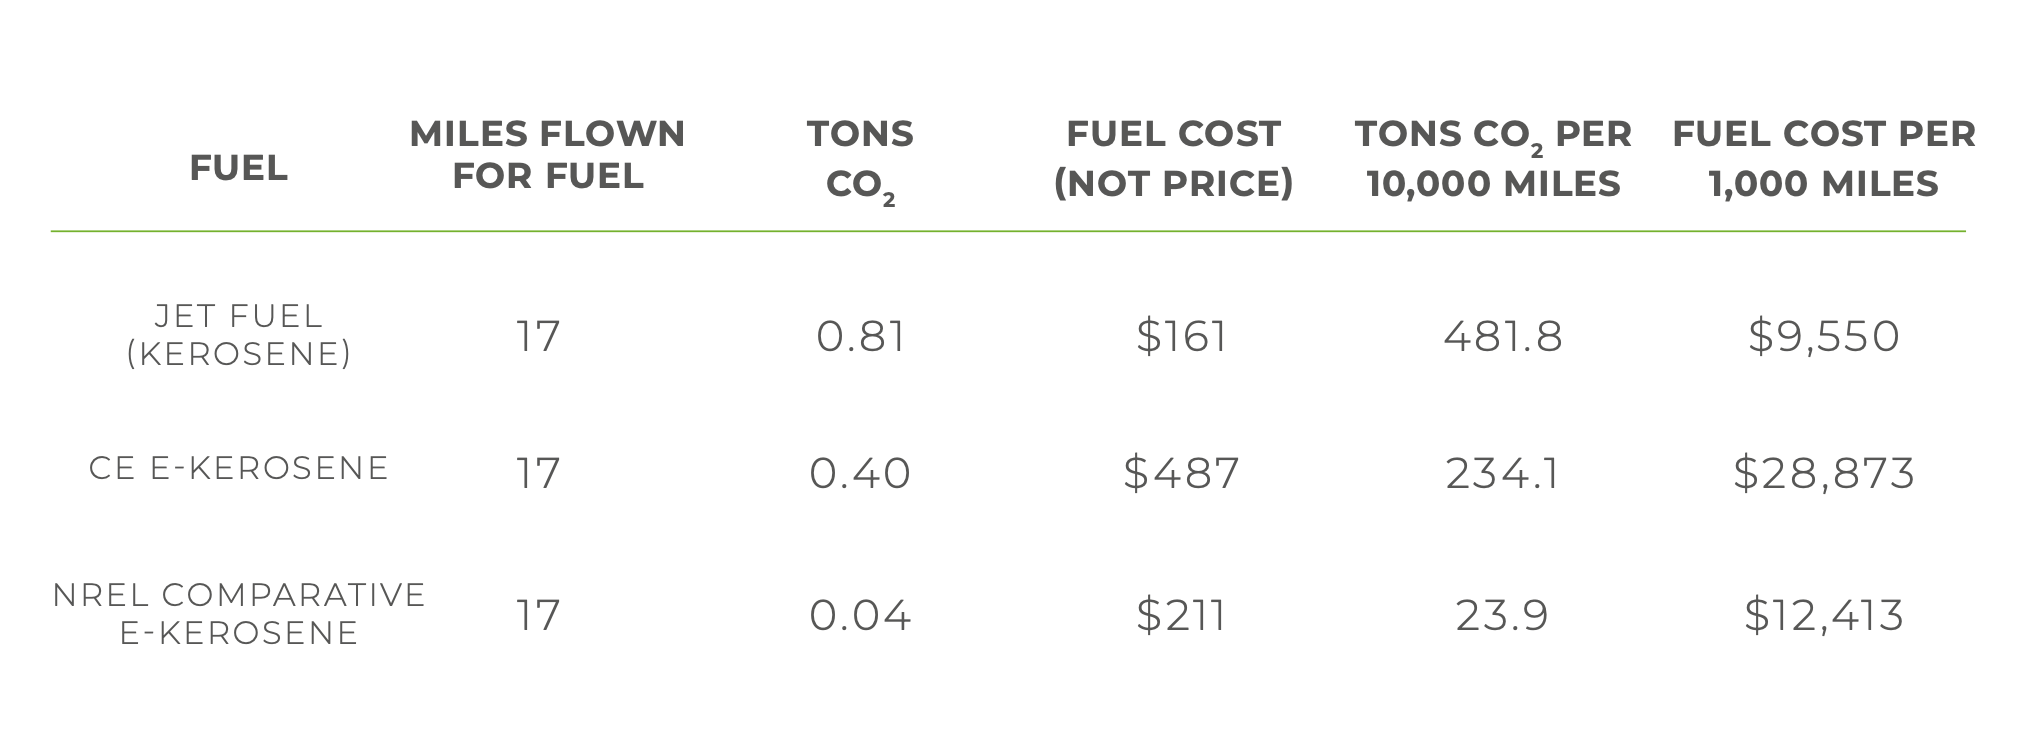 Comparative costs and CO2 for jet fuel, e-kerosene and biofuels from CleanTechnica case study on Carbon Engineering by author